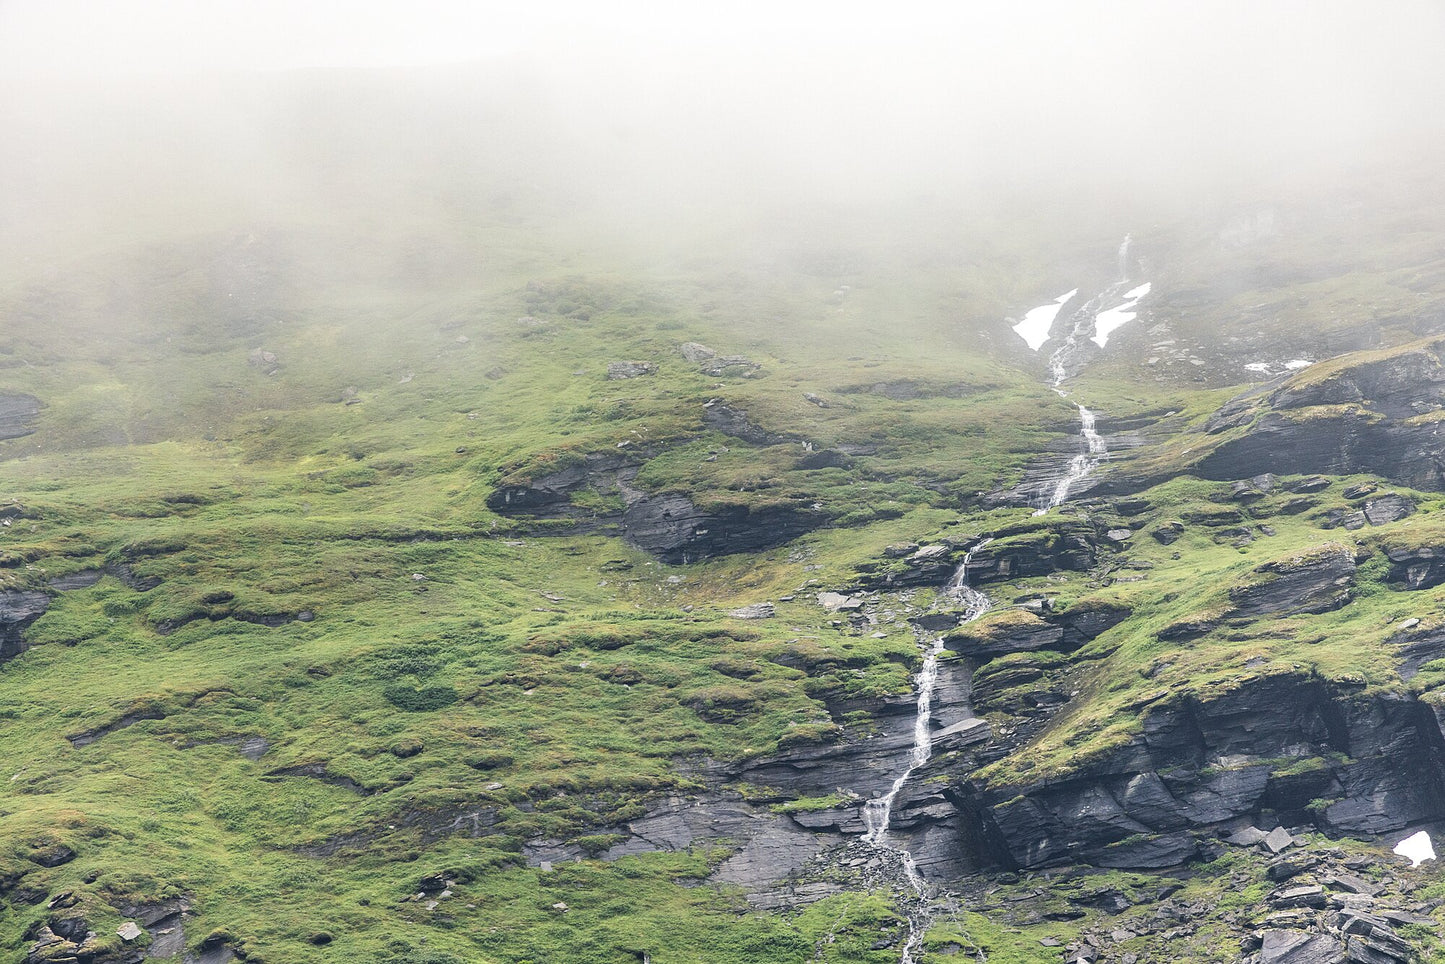 Thin stream flows down green Norwegian mountain with cloud-covered peak and unmelted snow.